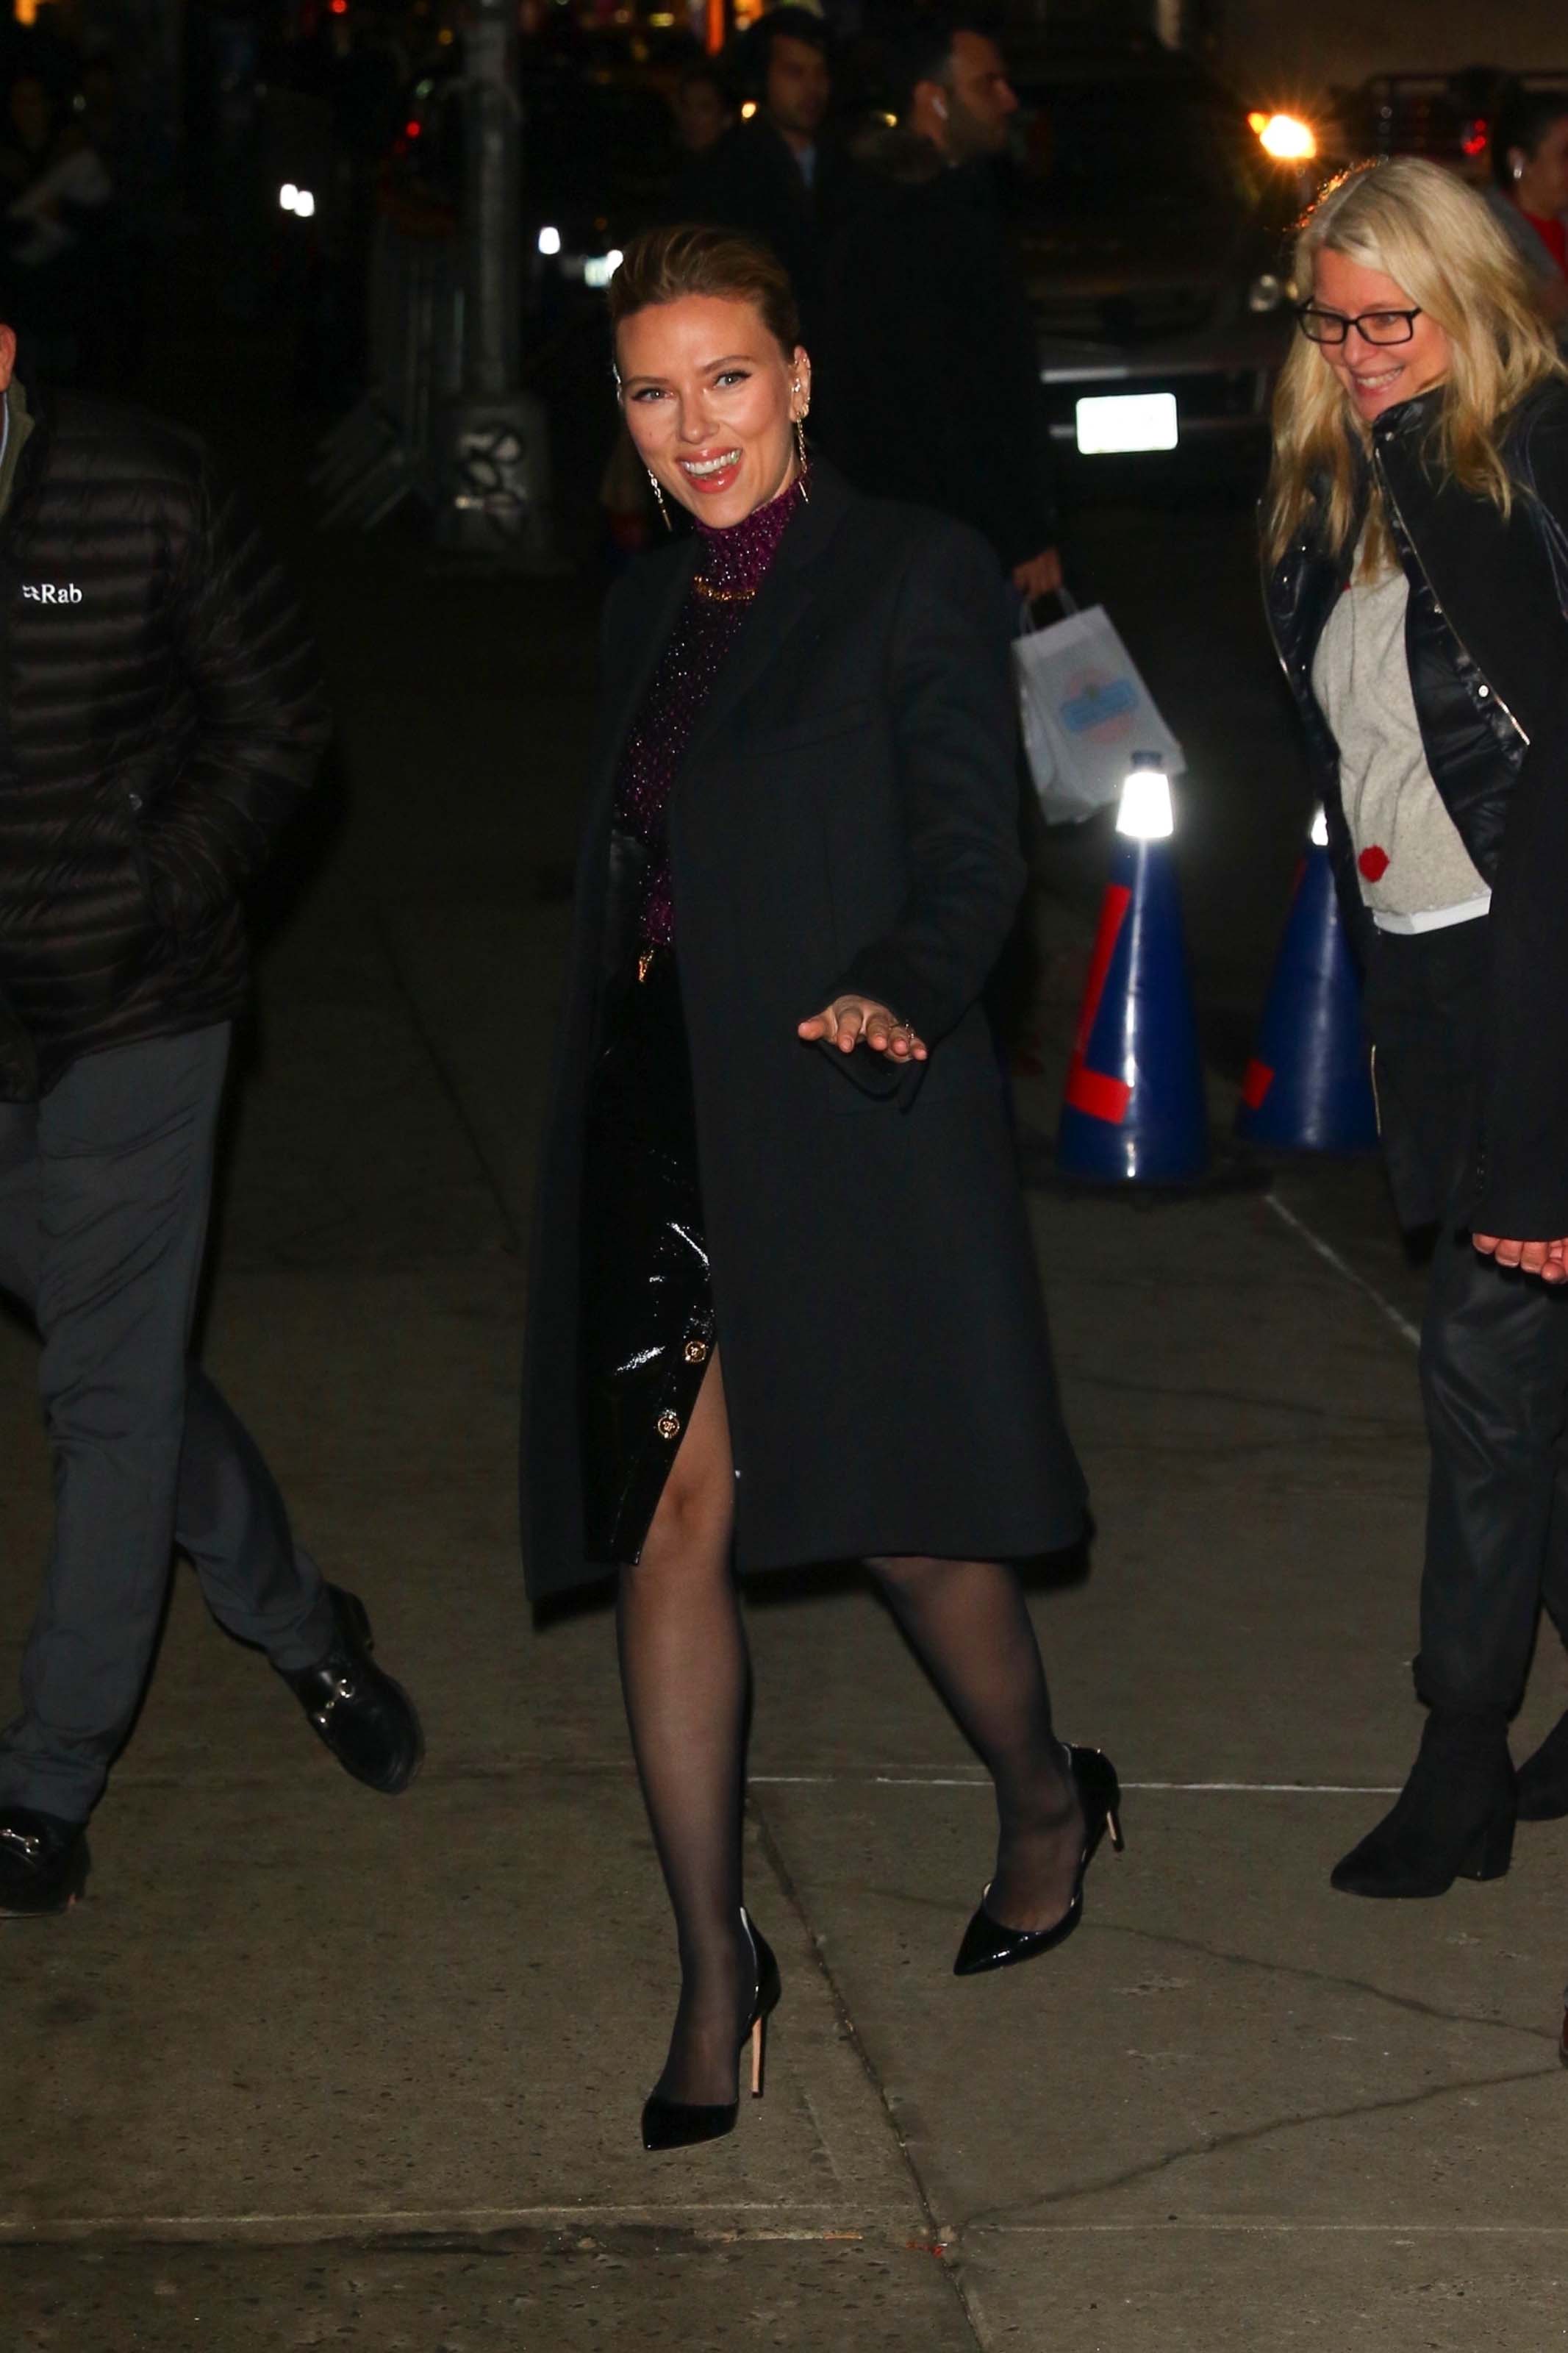 Scarlett Johansson arrives at The Late Show With Stephen Colbert’